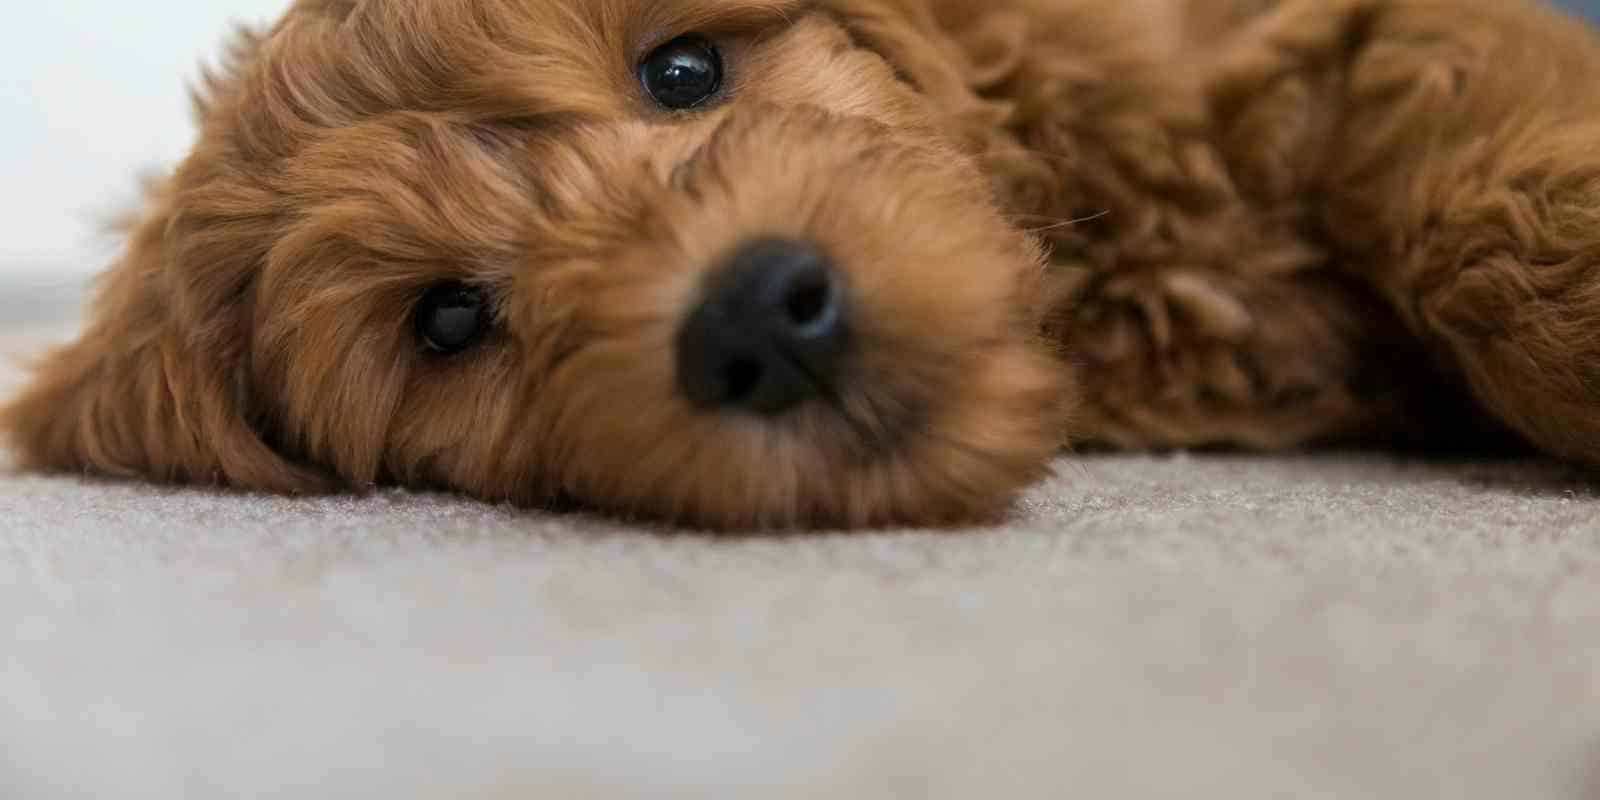 goldendoodle puppy pn its side